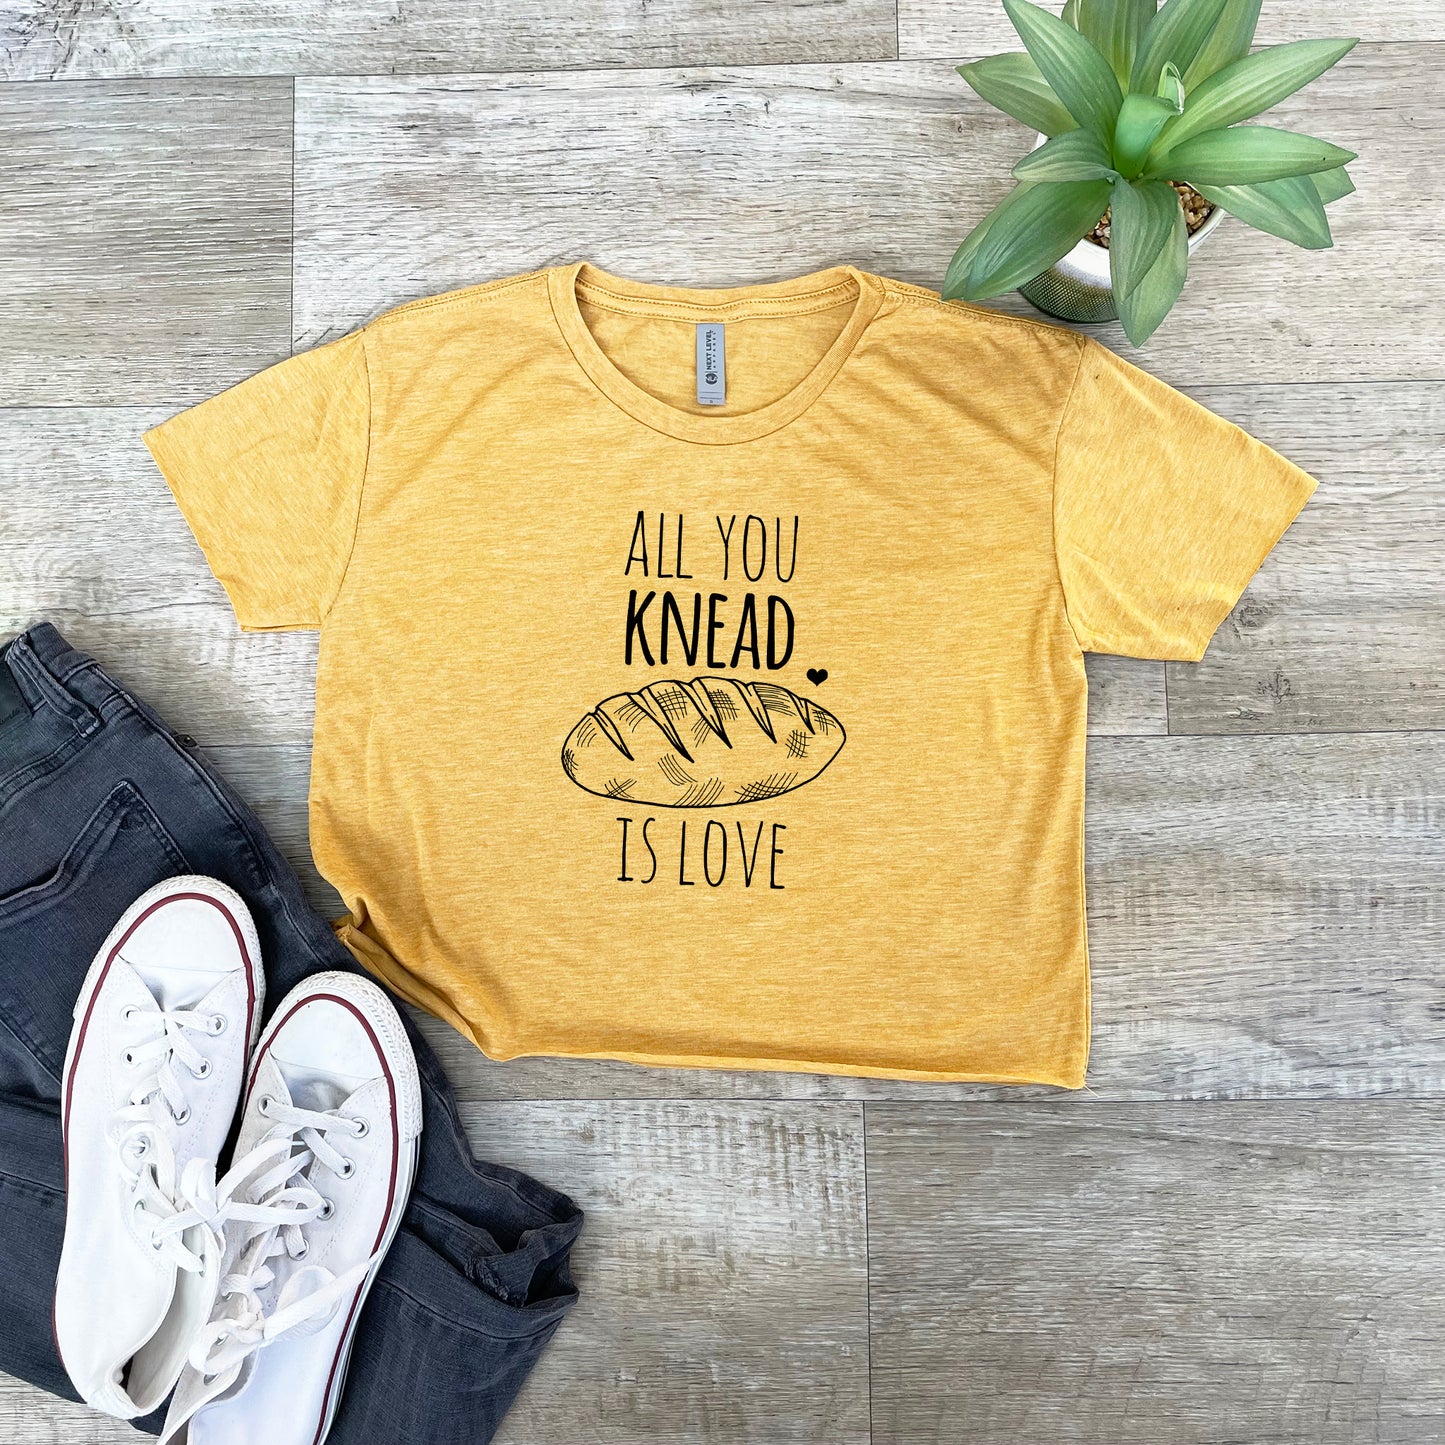 All You Knead Is Love - Women's Crop Tee - Heather Gray or Gold